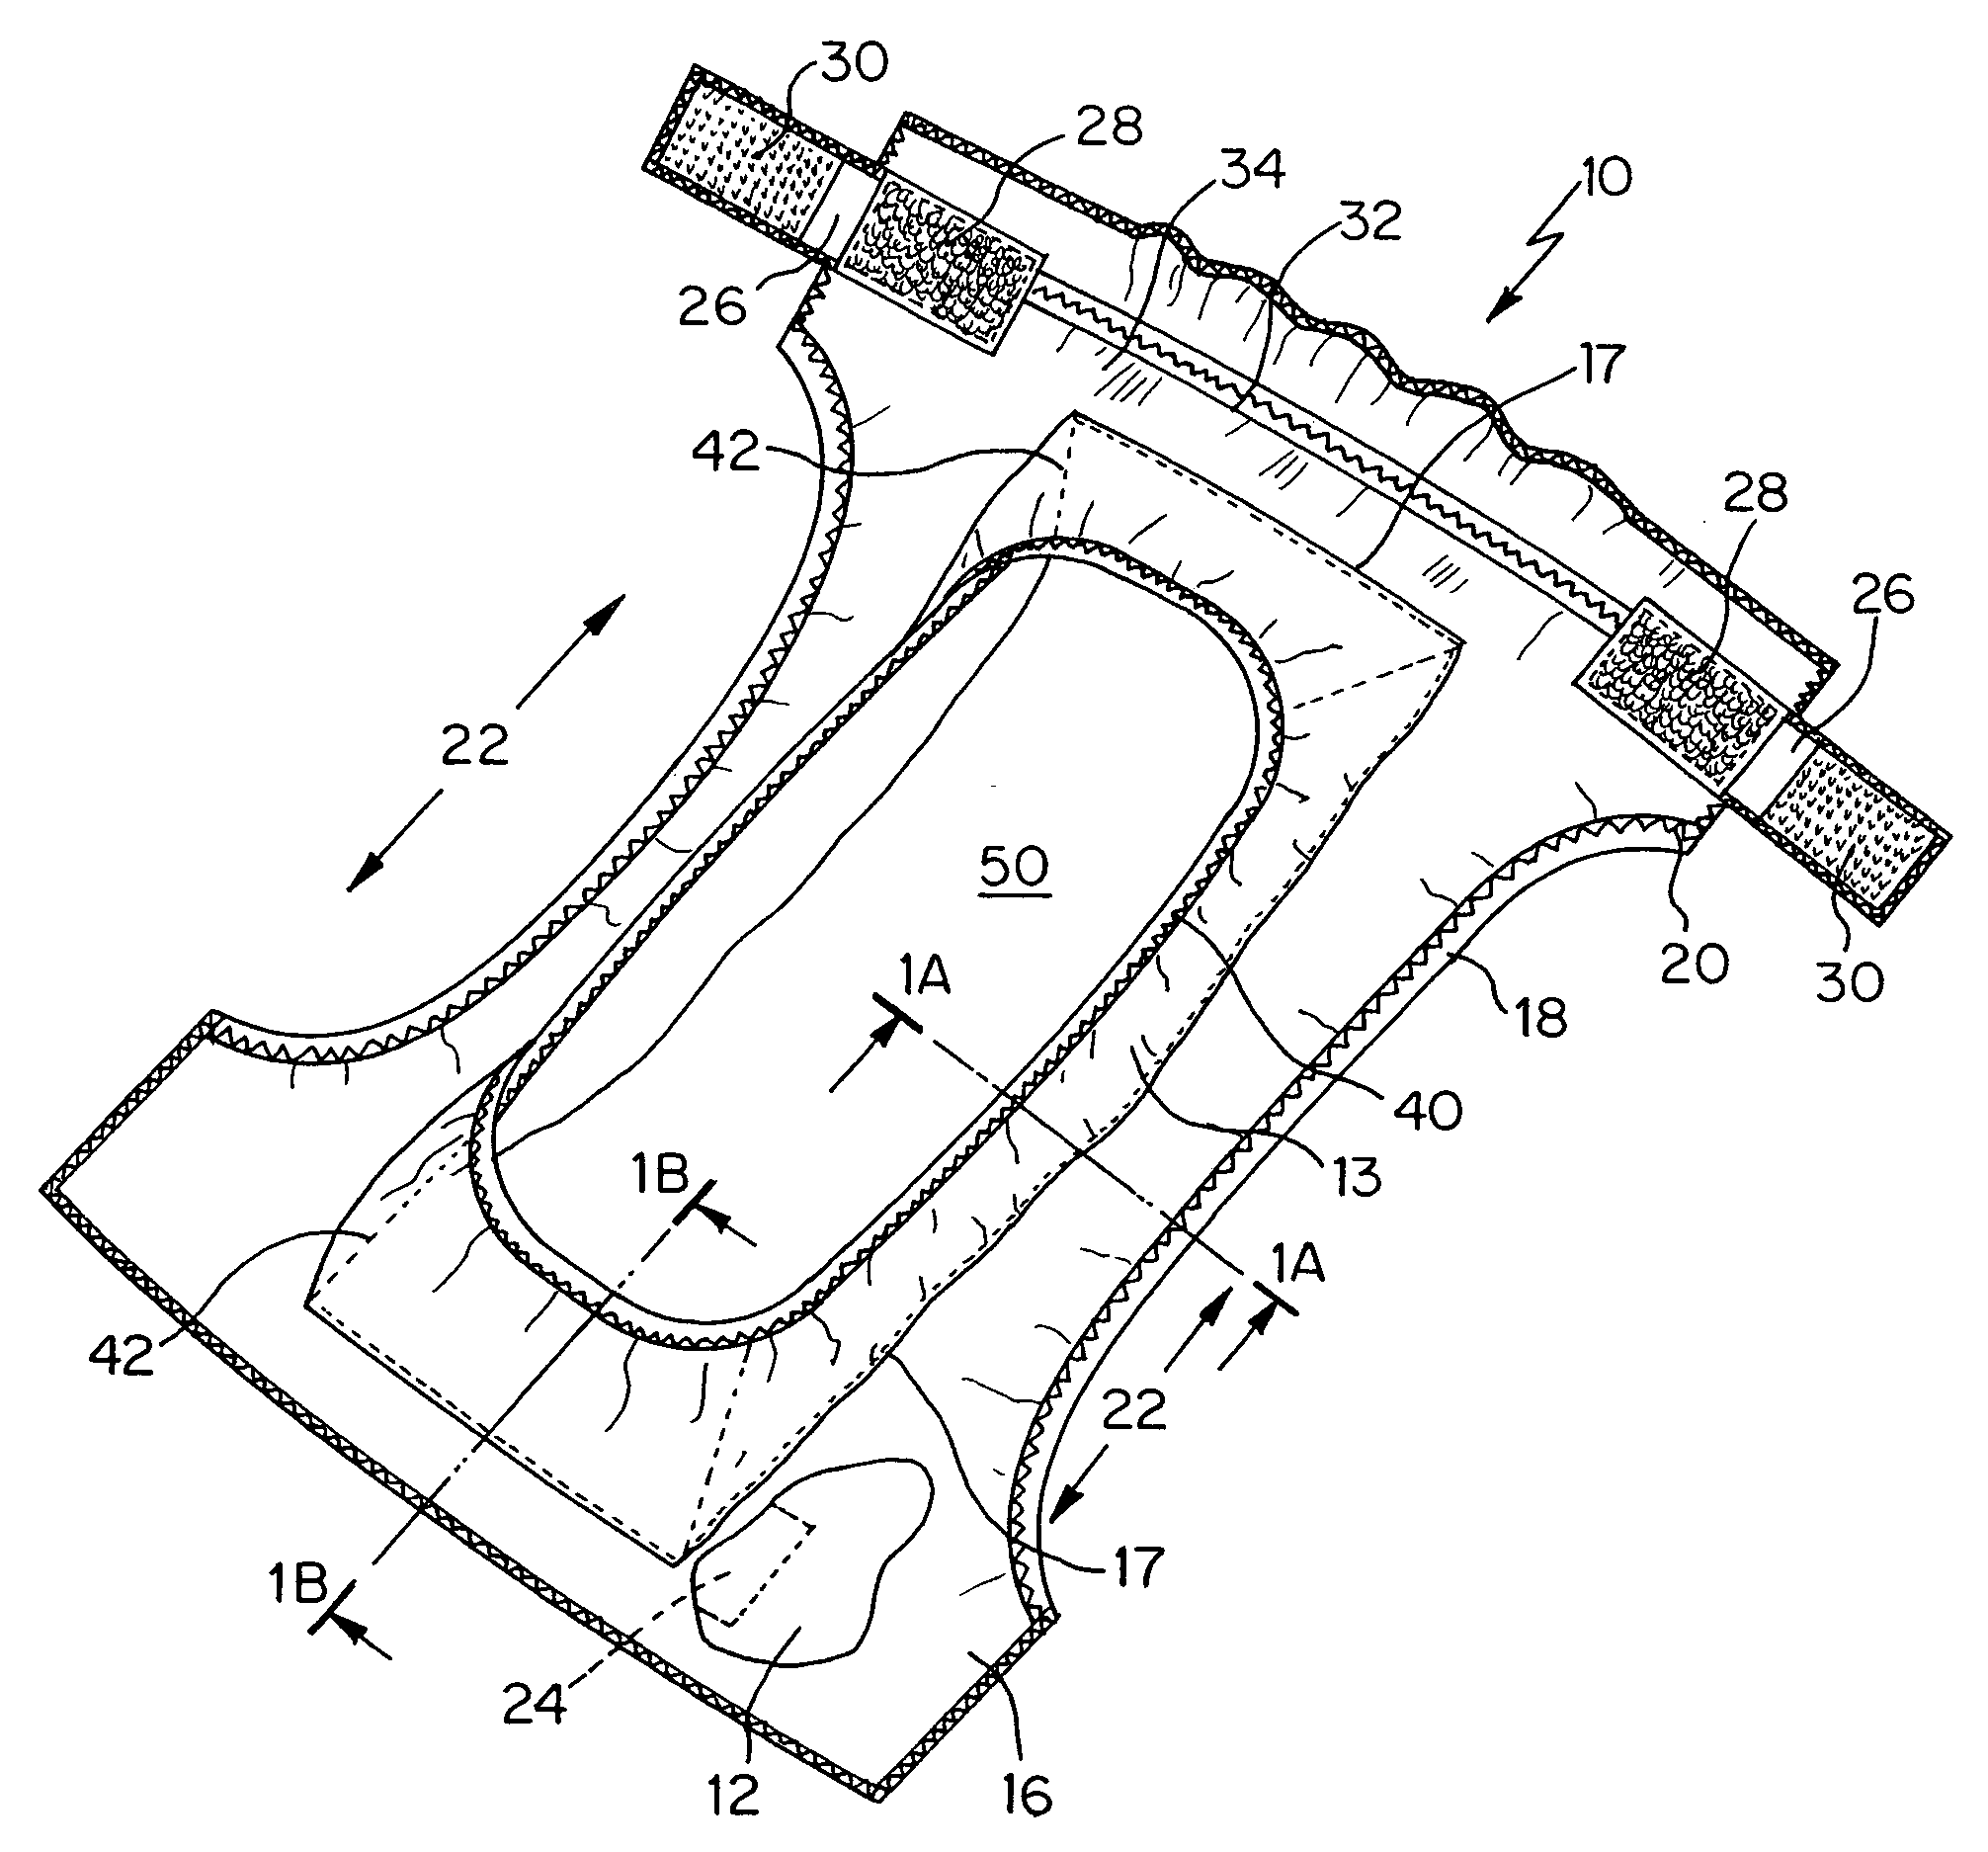 Protective undergarments having anchored pocketed-sling structures and manufacturing method therefor